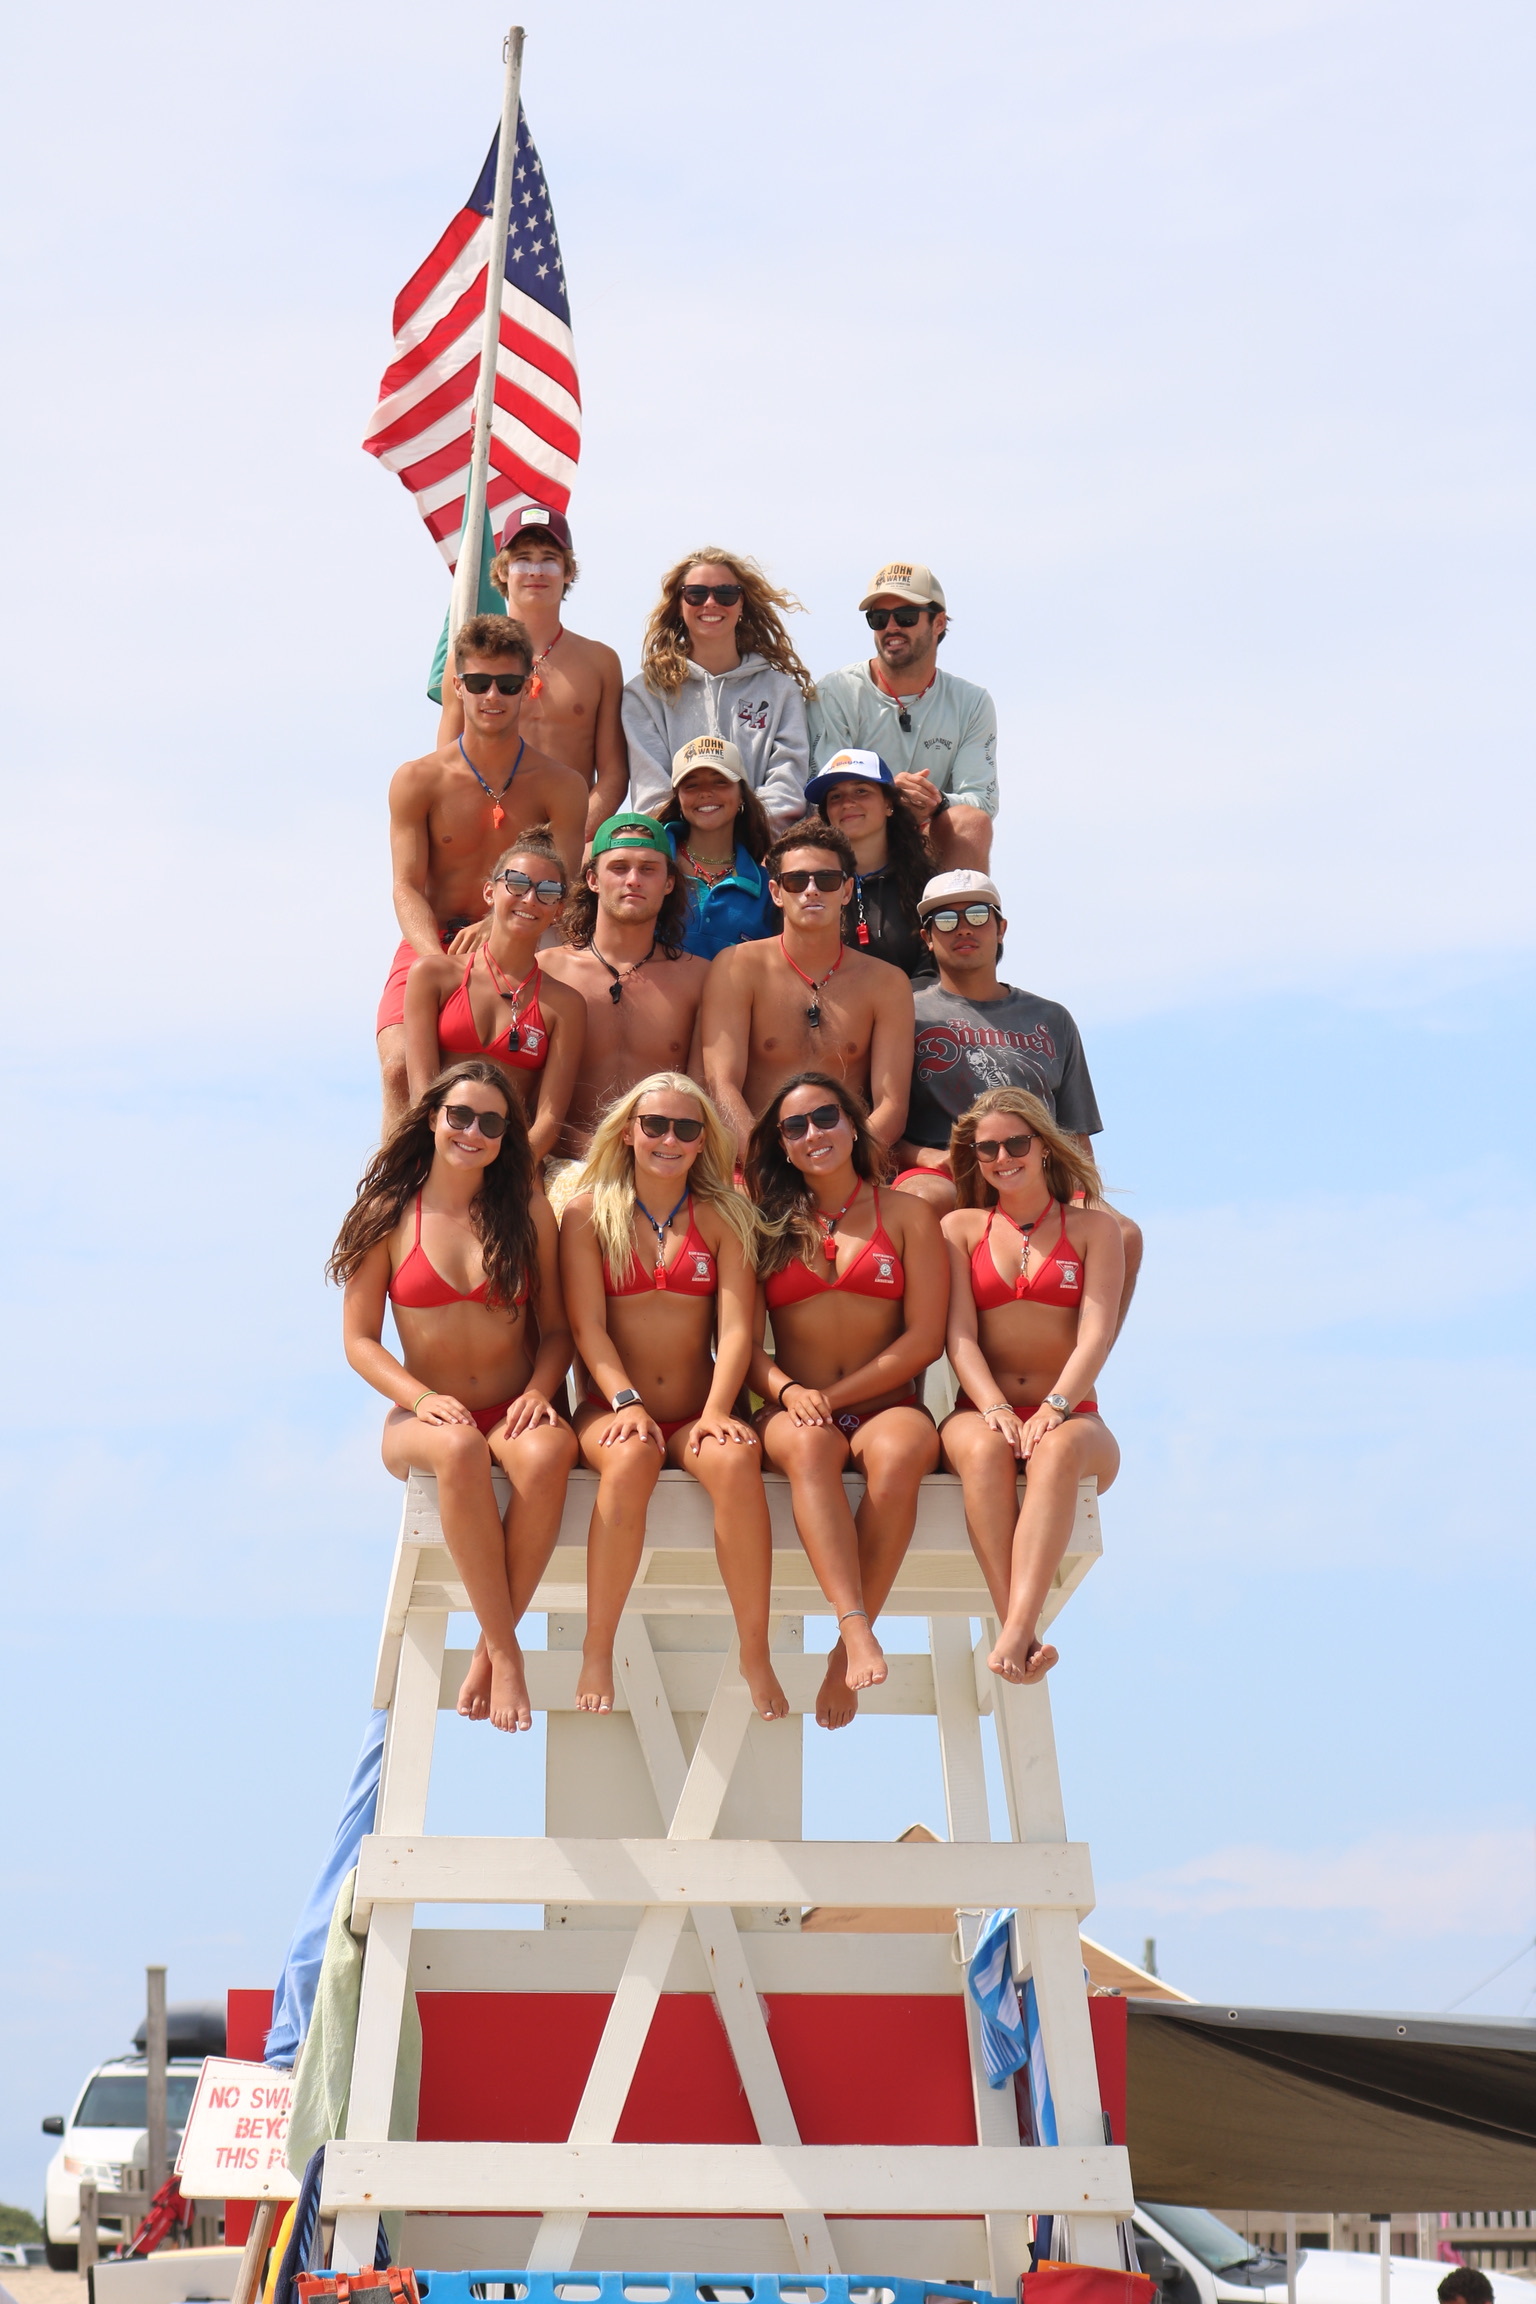 Indian Wells lifeguards, many of which, if not all, went through East Hampton Town's junior lifeguard program.